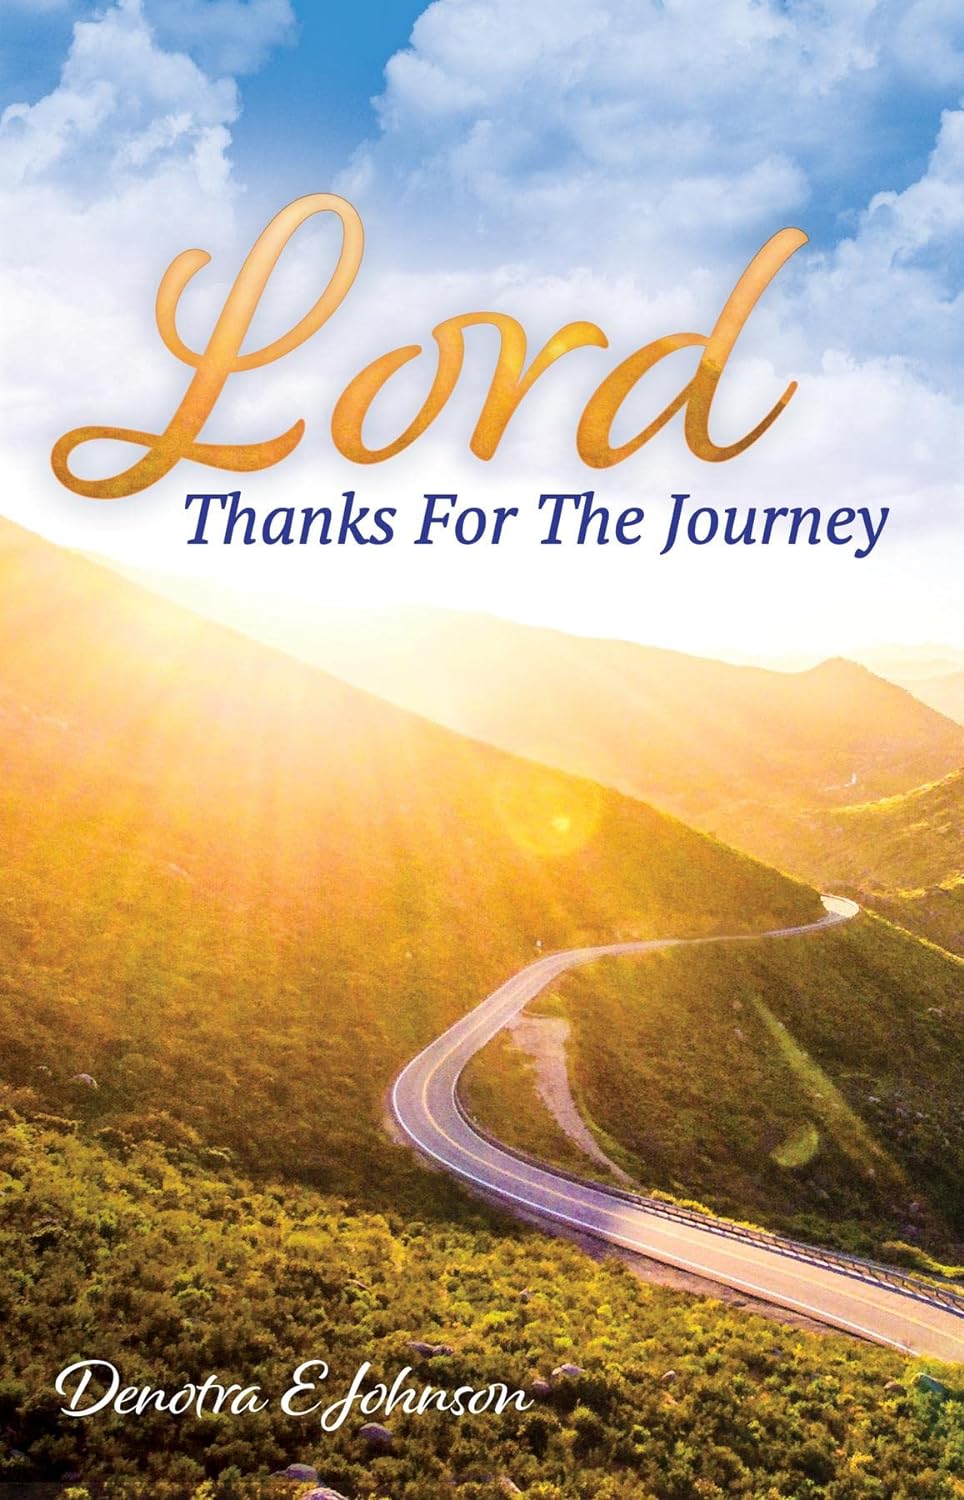 Embark on a Transformative Journey with "Lord, Thanks For The Journey" by Denotra E Johnson